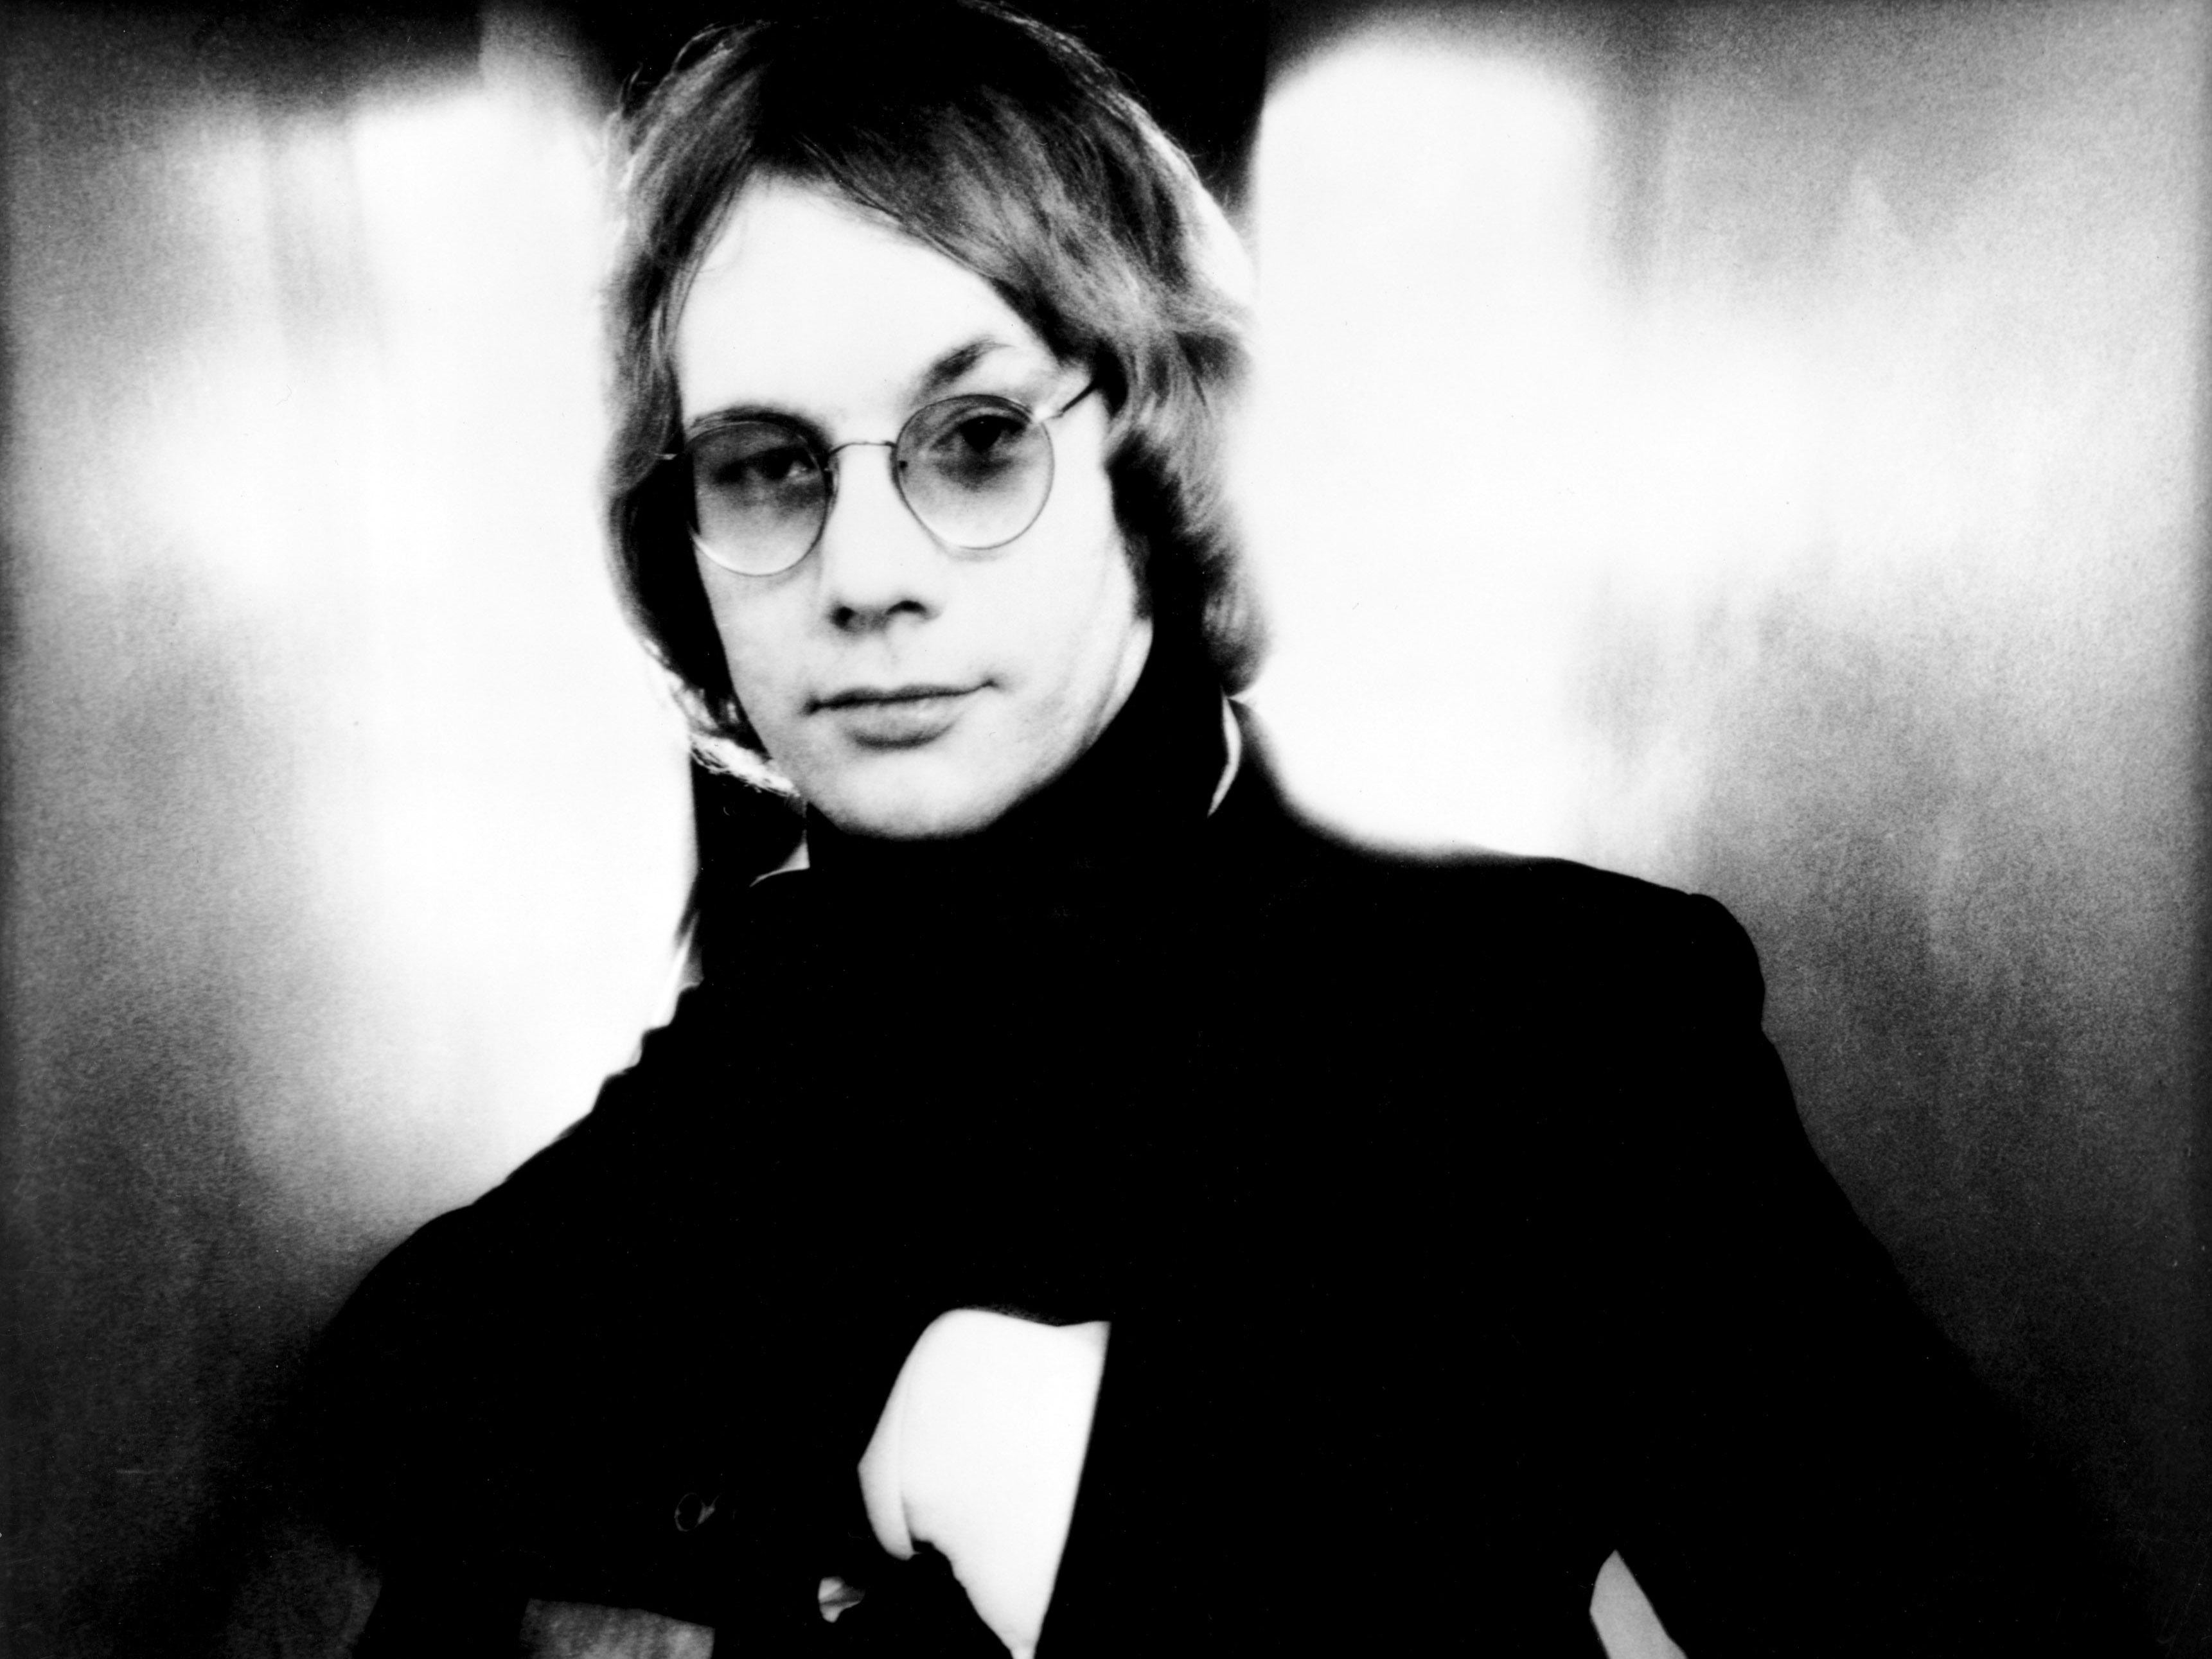 Warren Zevon’s albums swilled with troubling tales of mercenaries, psychopaths and bent lawyers